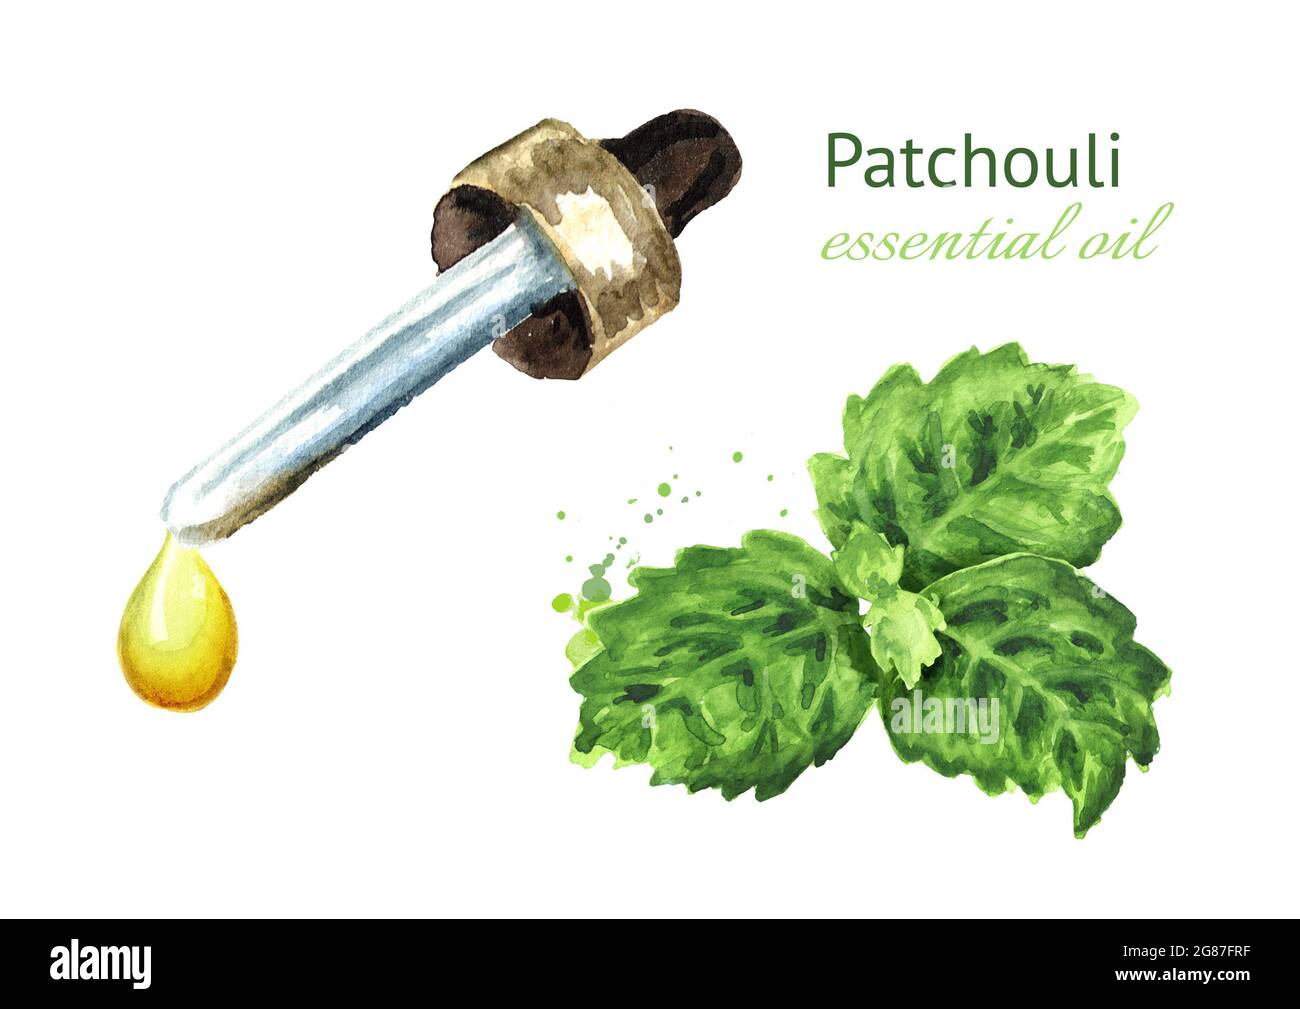 Patchouli or Pogostemon cablini essential oil drop. Hand drawn watercolor illustration isolated on white background Stock Photo